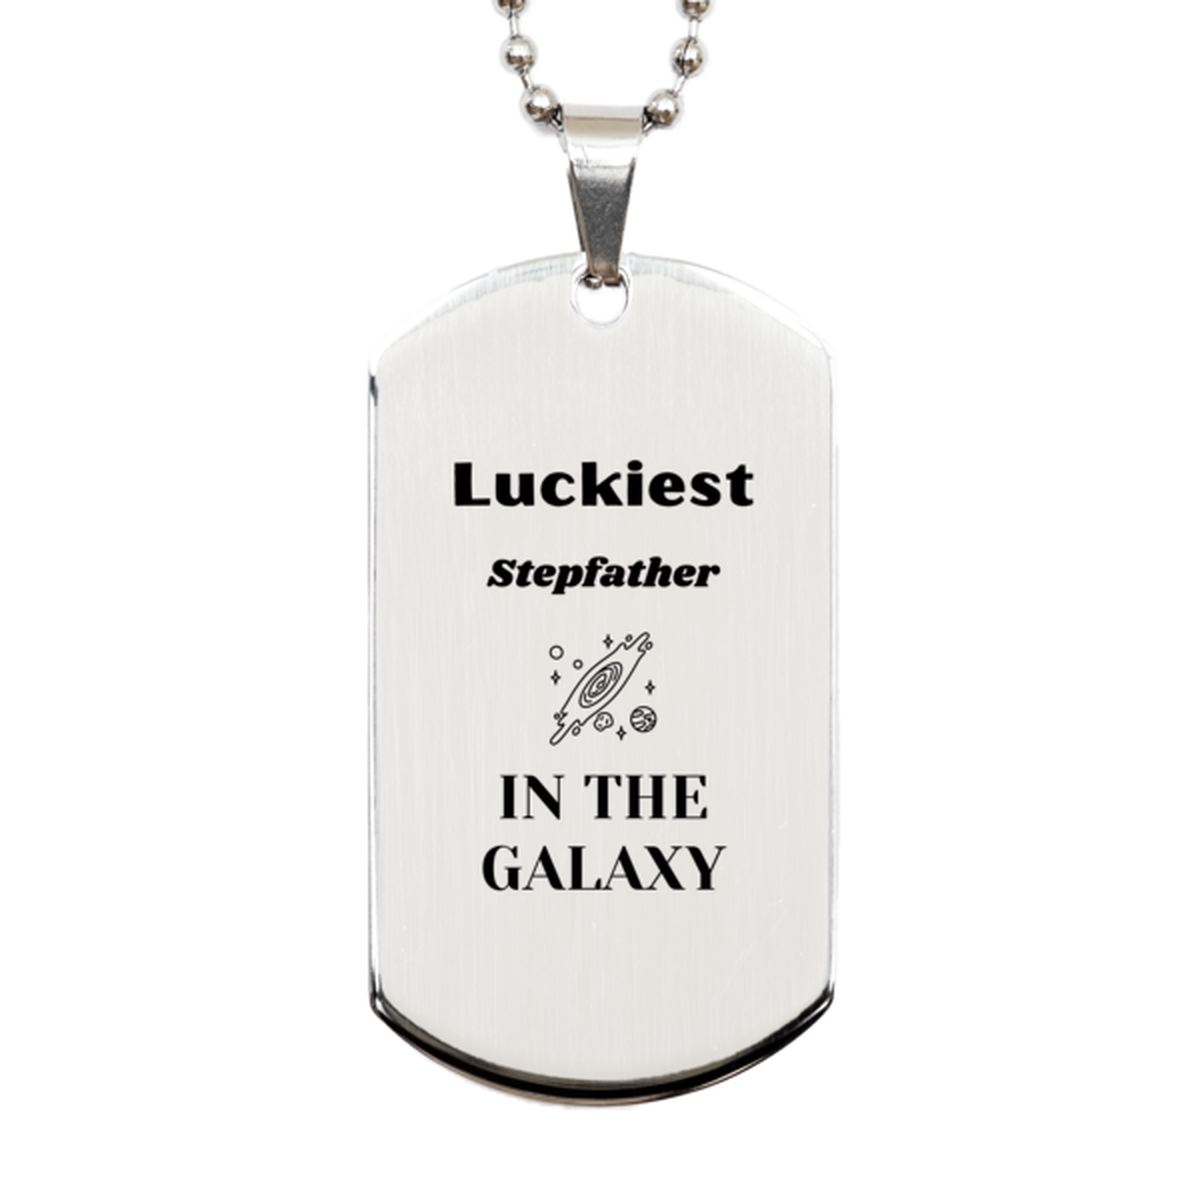 Luckiest Stepfather in the Galaxy, To My Stepfather Engraved Gifts, Christmas Stepfather Silver Dog Tag Gifts, X-mas Birthday Unique Gifts For Stepfather Men Women